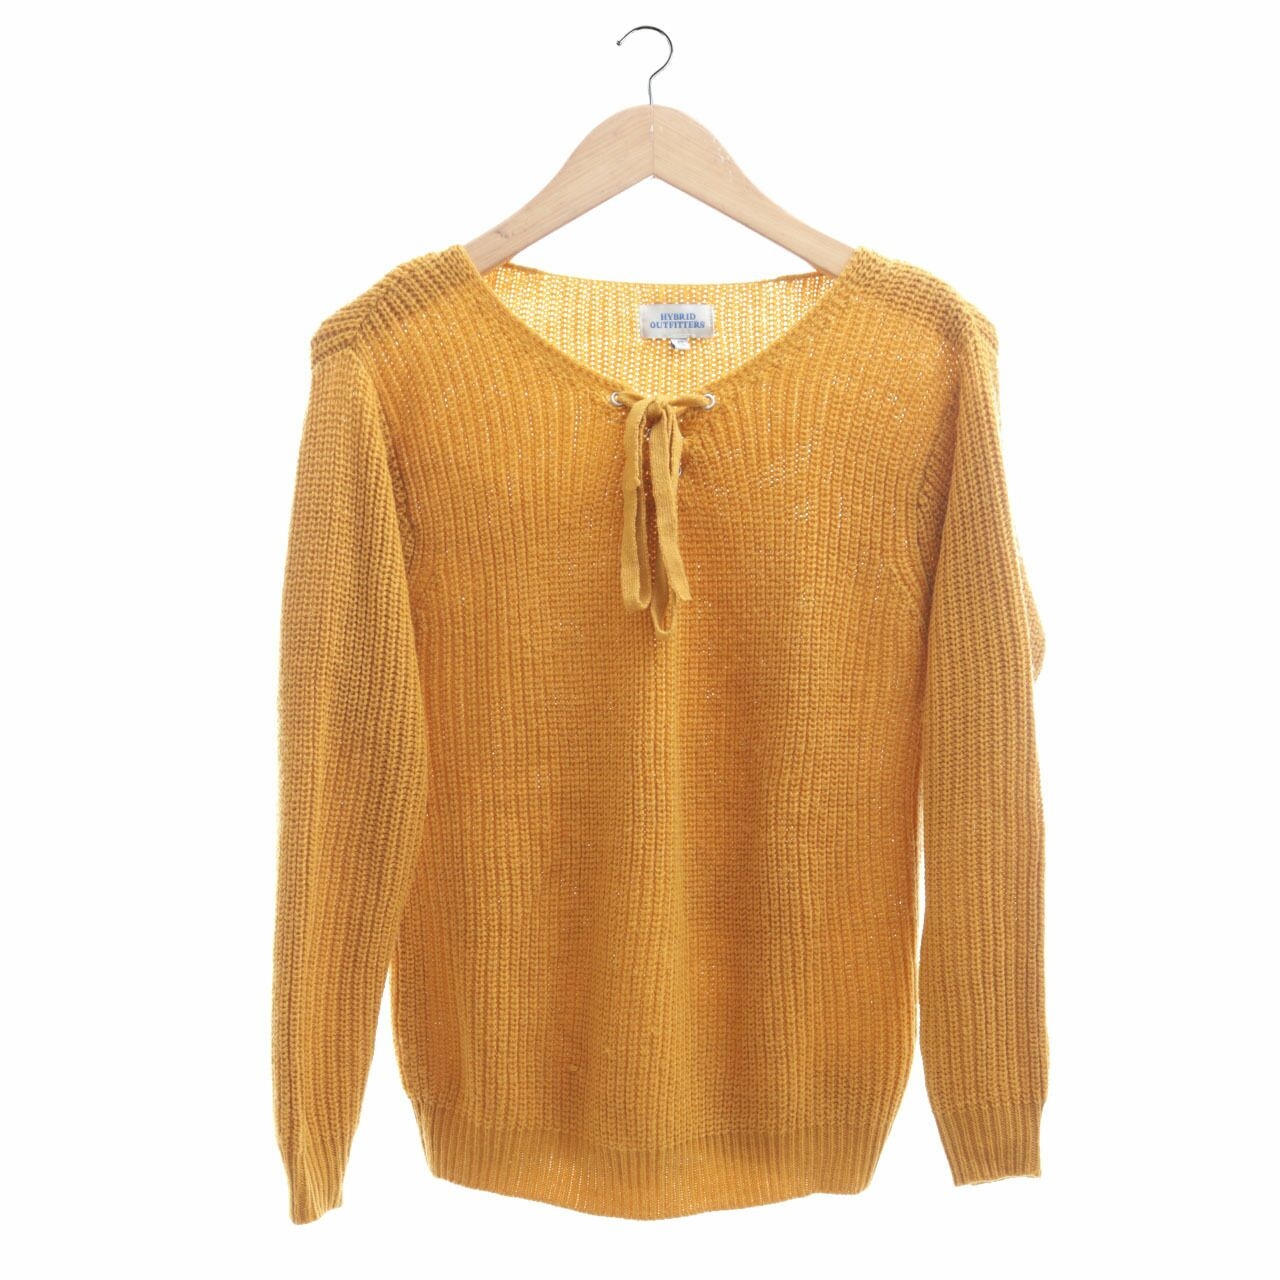 Hybrid Outfitters Mustard Sweater